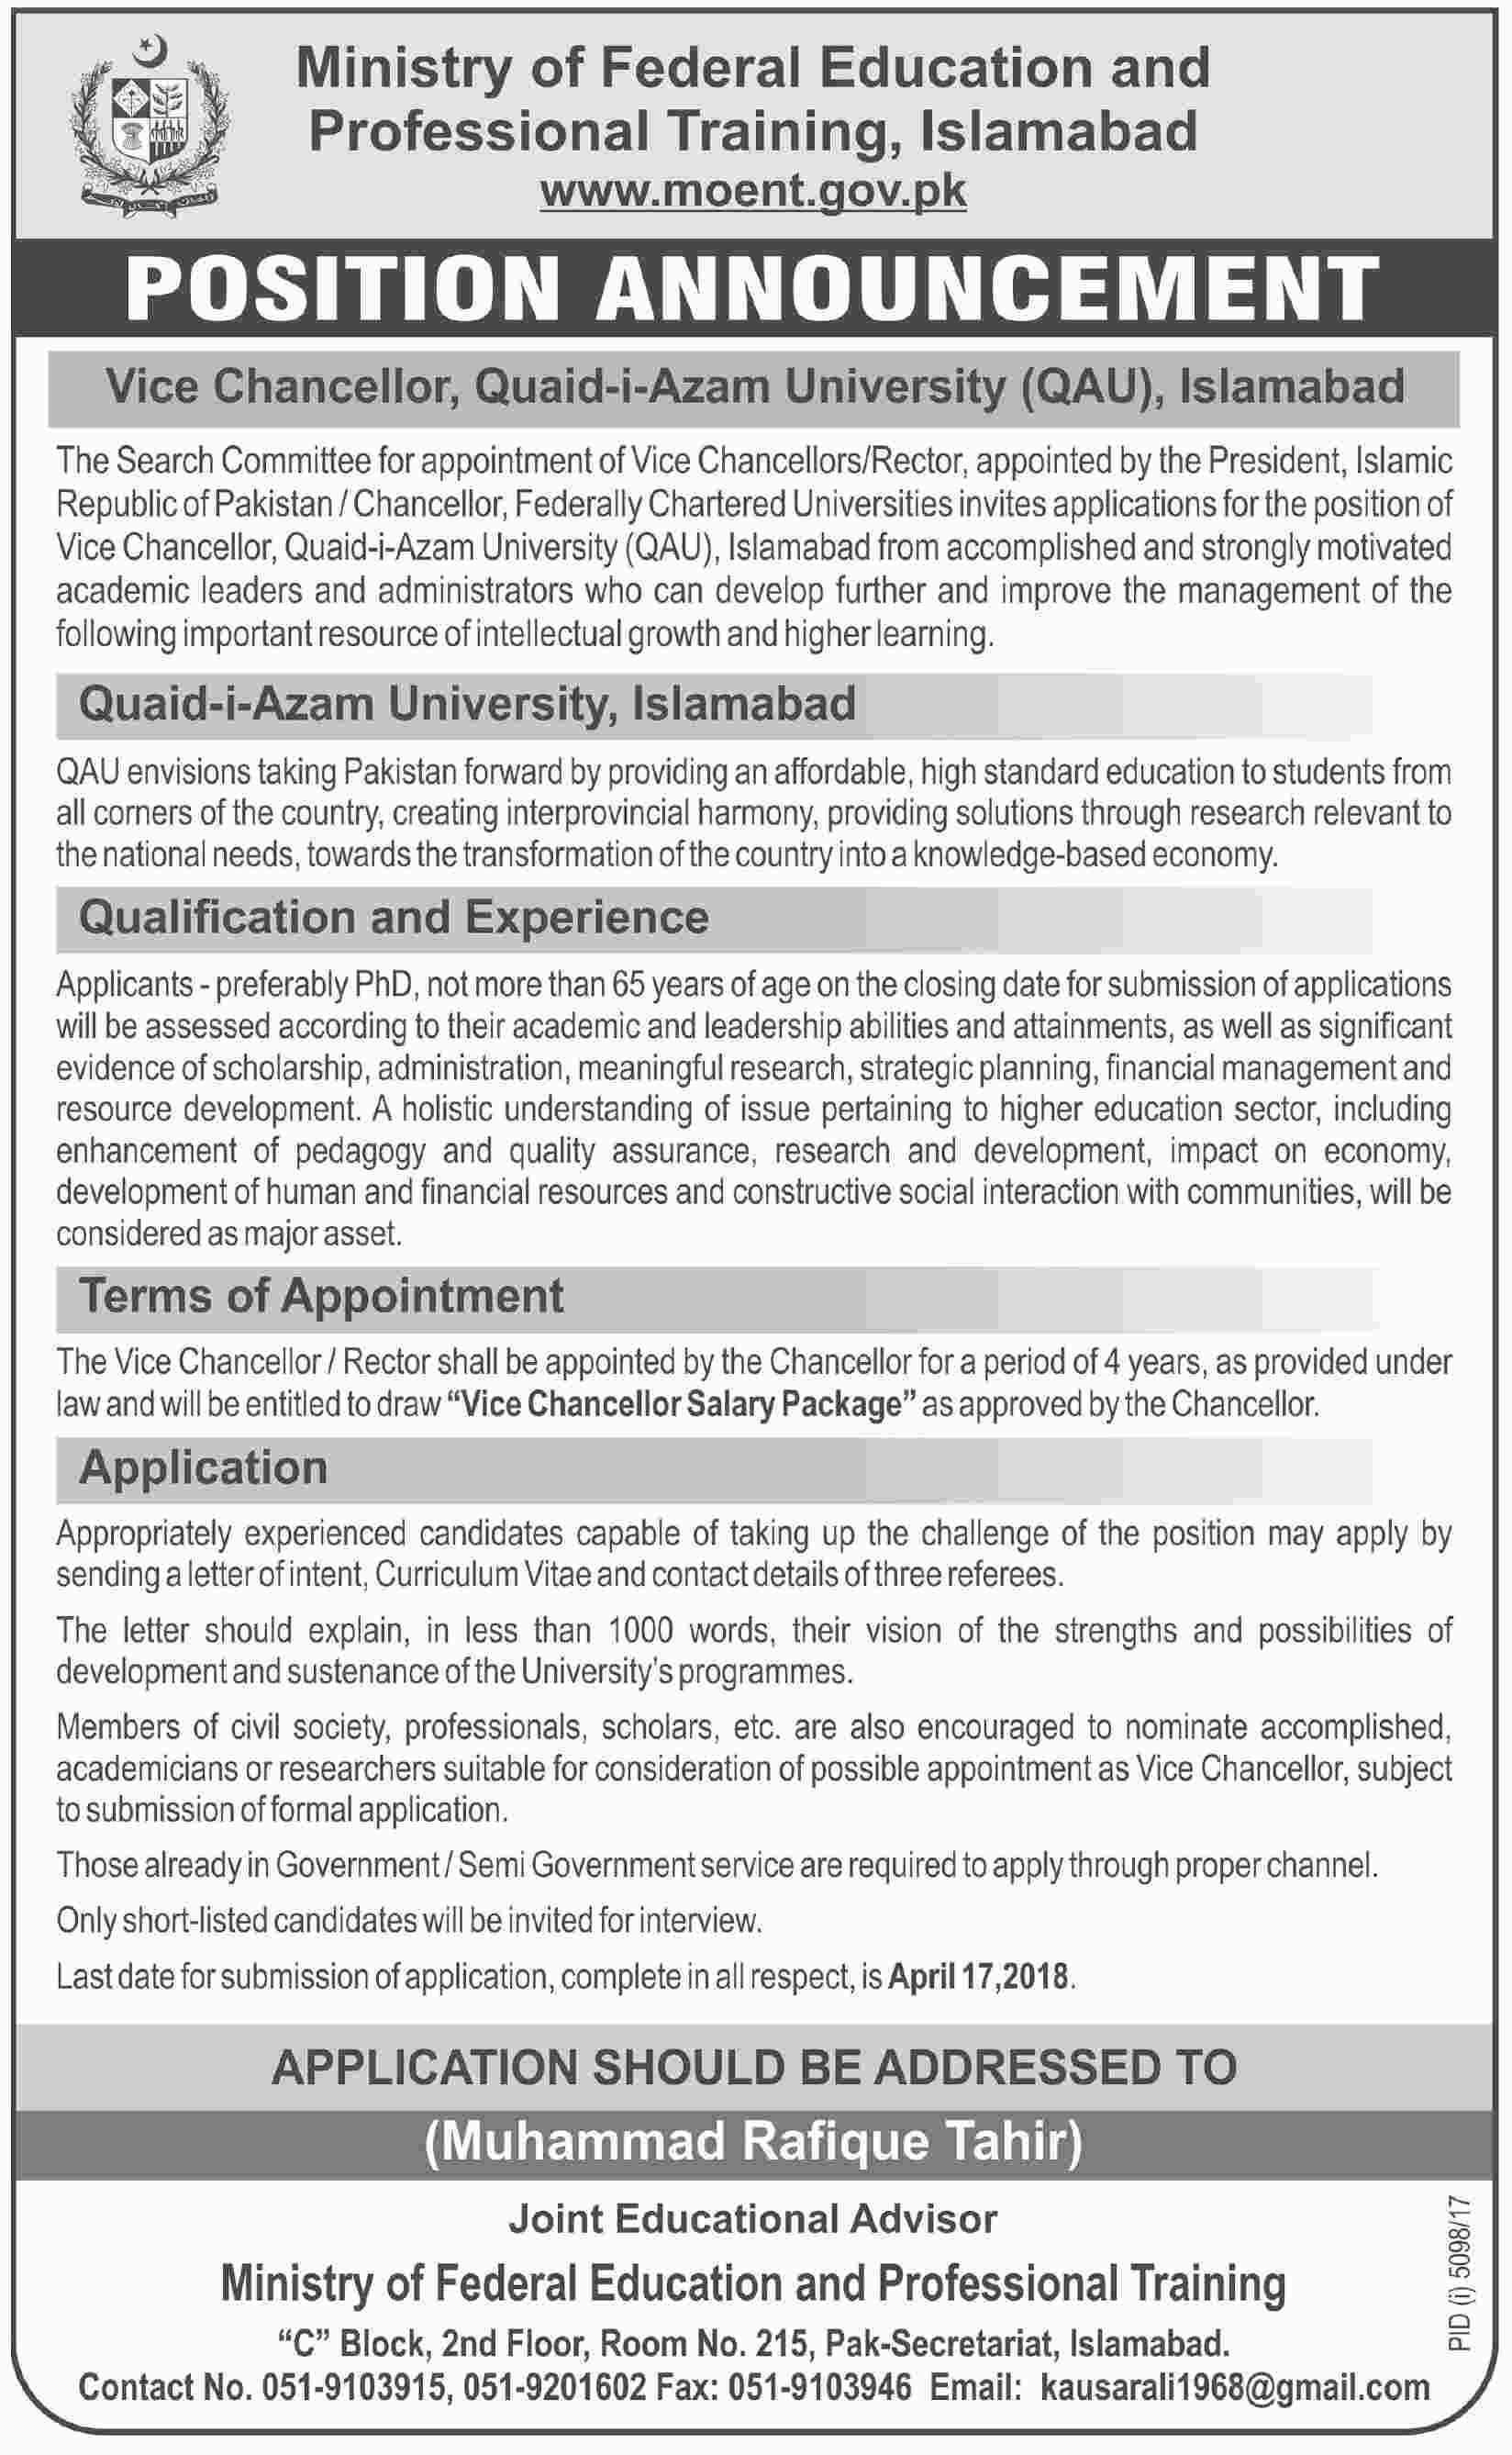 Jobs in Ministry of Federal Education and Professional Training 18 March 2018